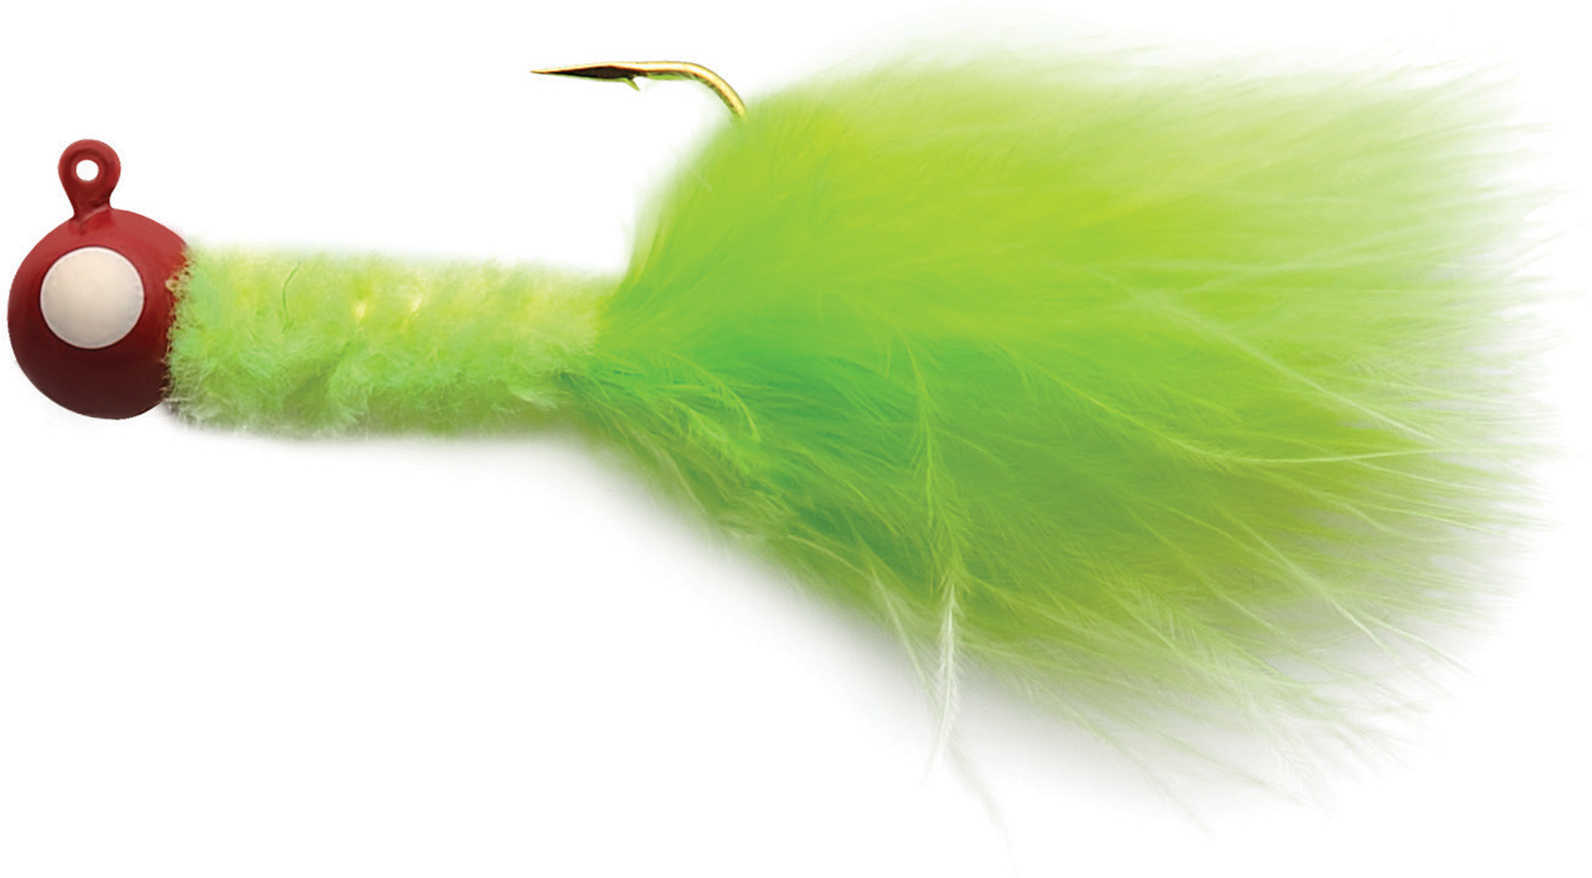 Eagle Claw Fishing Tackle Crappie Jig 1/16 oz Red-Chartreuse Md: ECJC1/16-RC